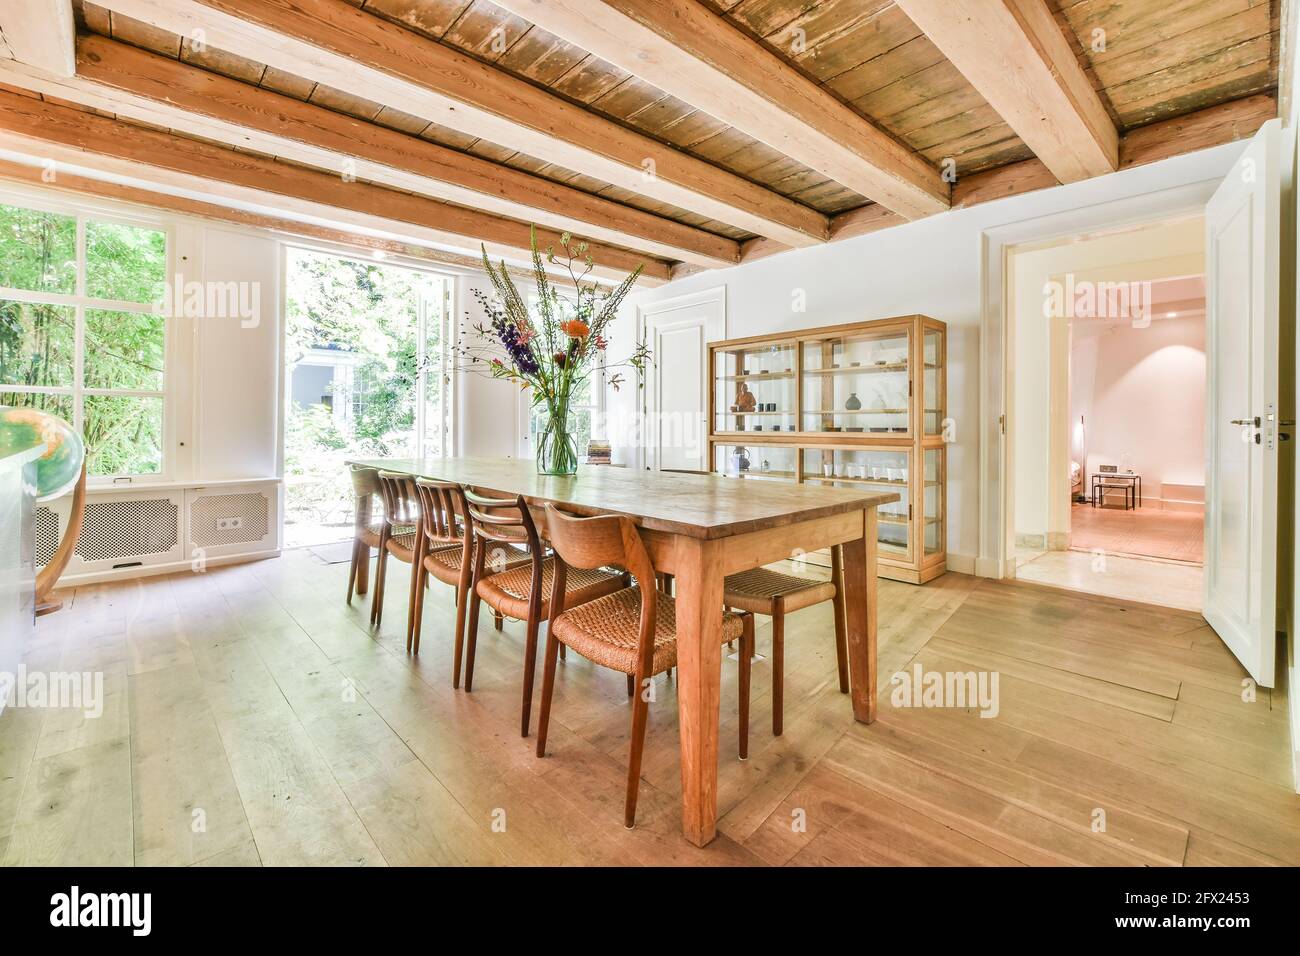 Wooden dining table with chairs under ceiling with wooden beams in cozy country room of house Stock Photo